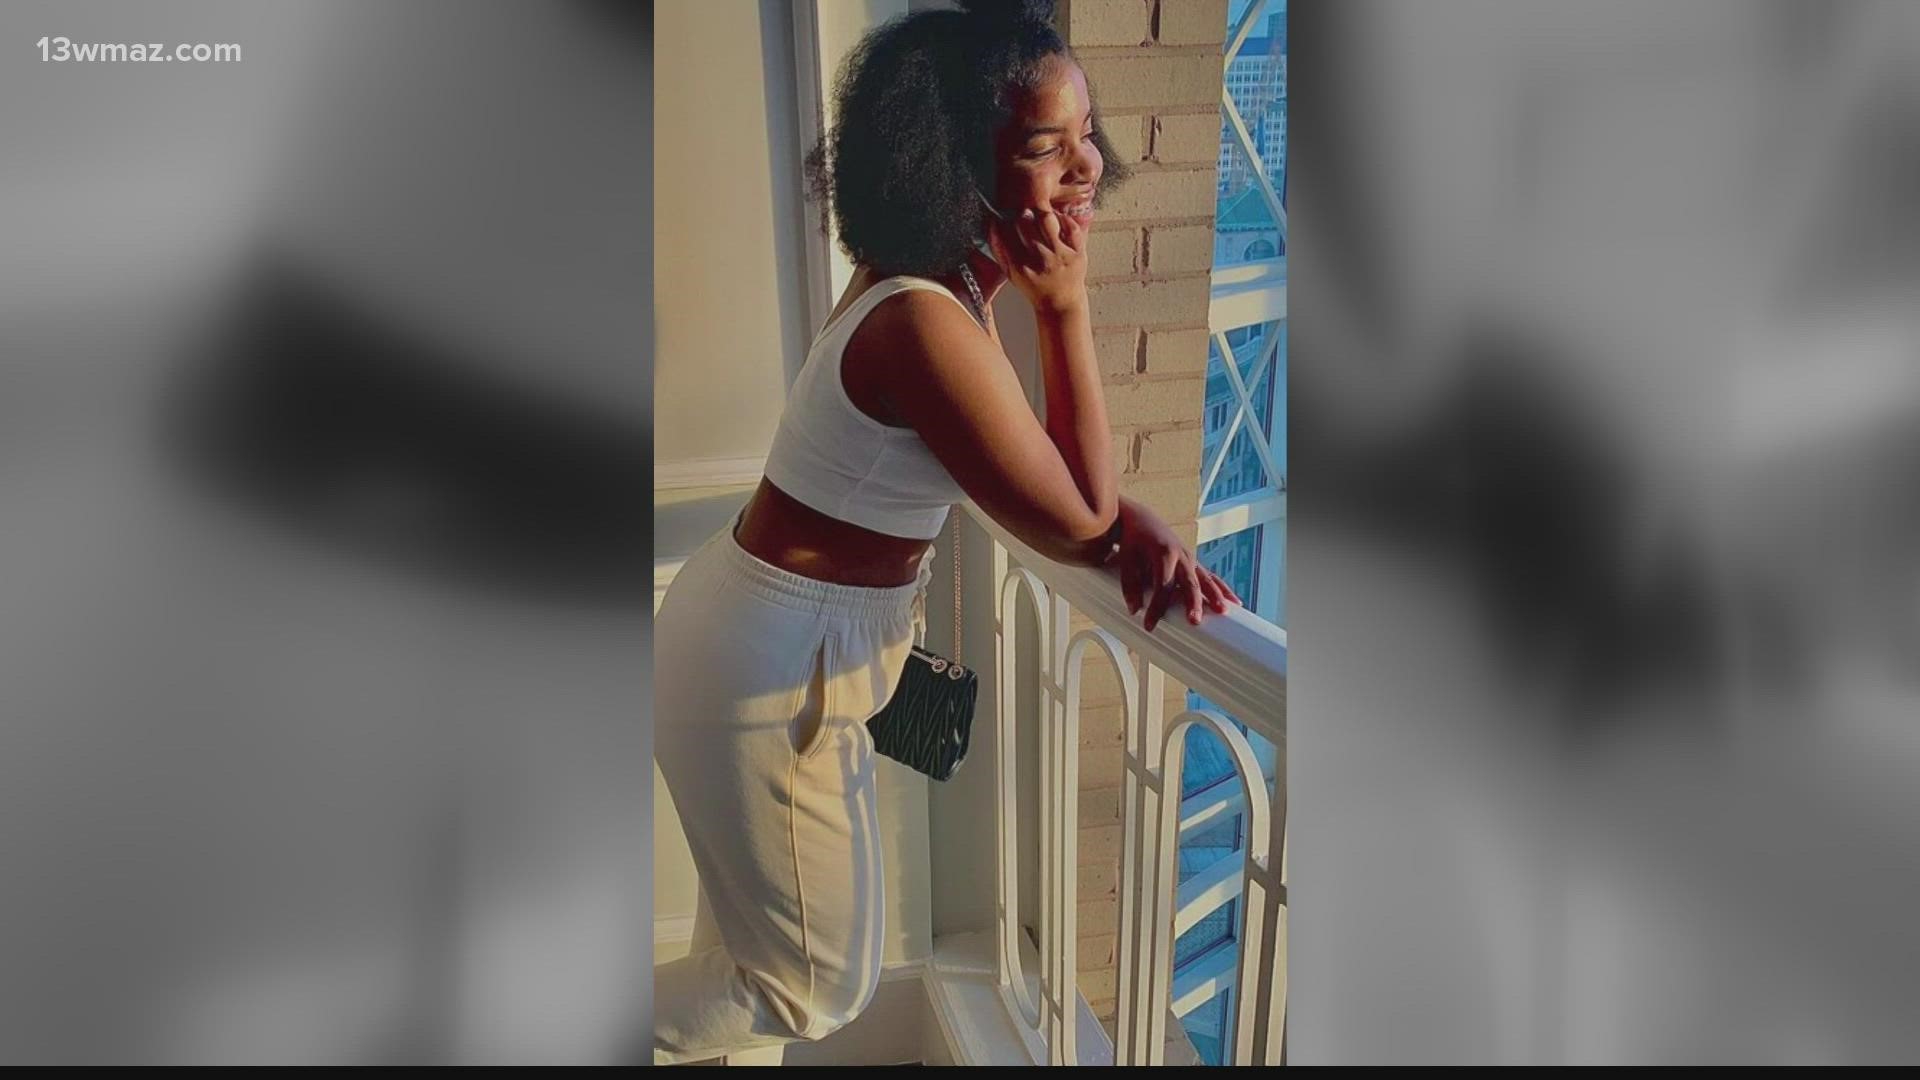 15-year-old Tanyla Johnson was killed Saturday in a shooting that left 4 others injured